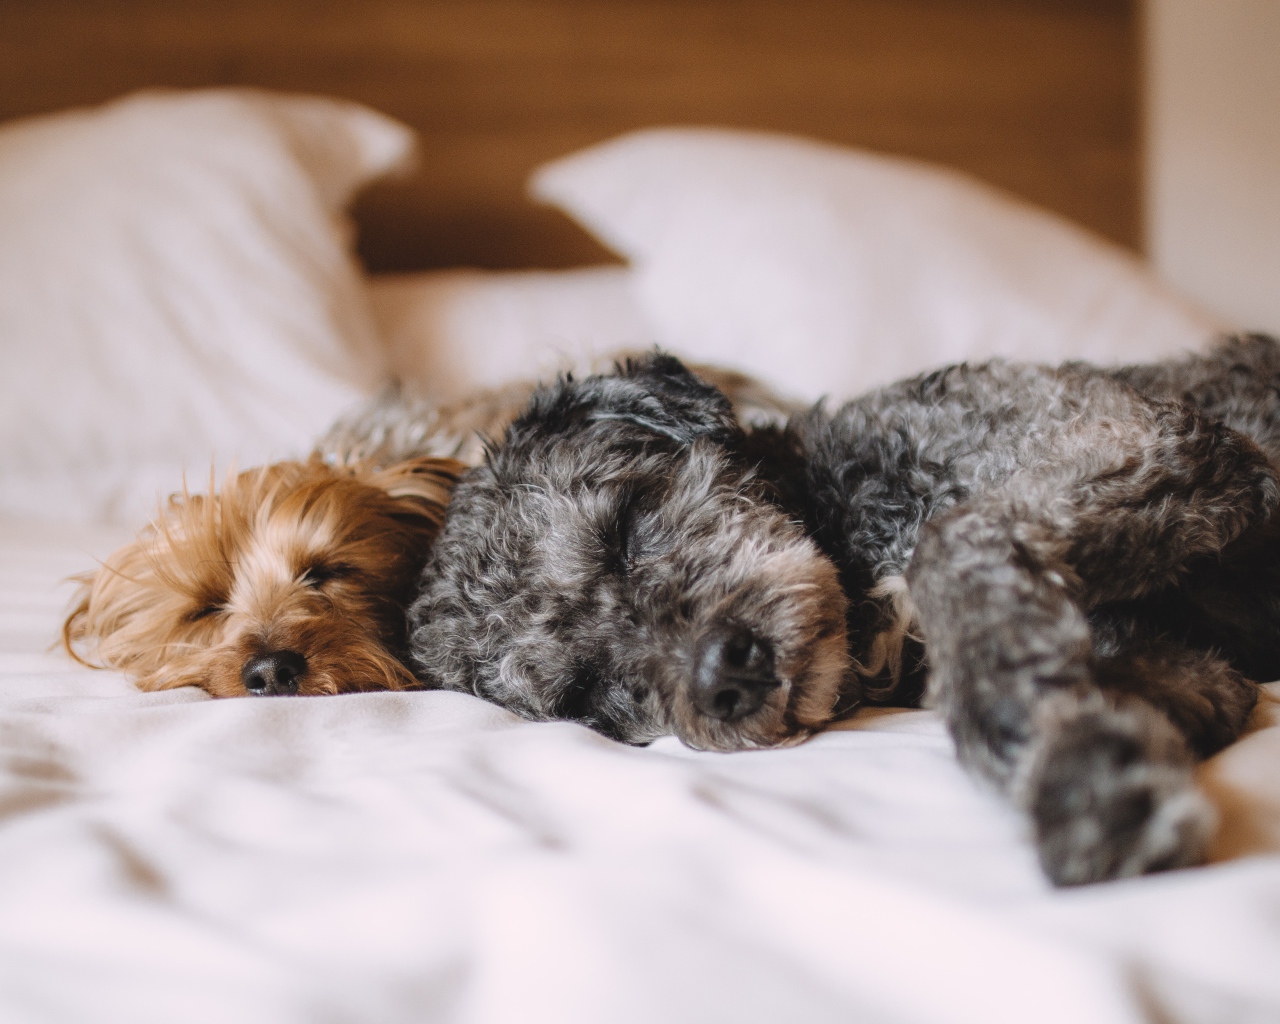 Two dogs sleeping on the bed